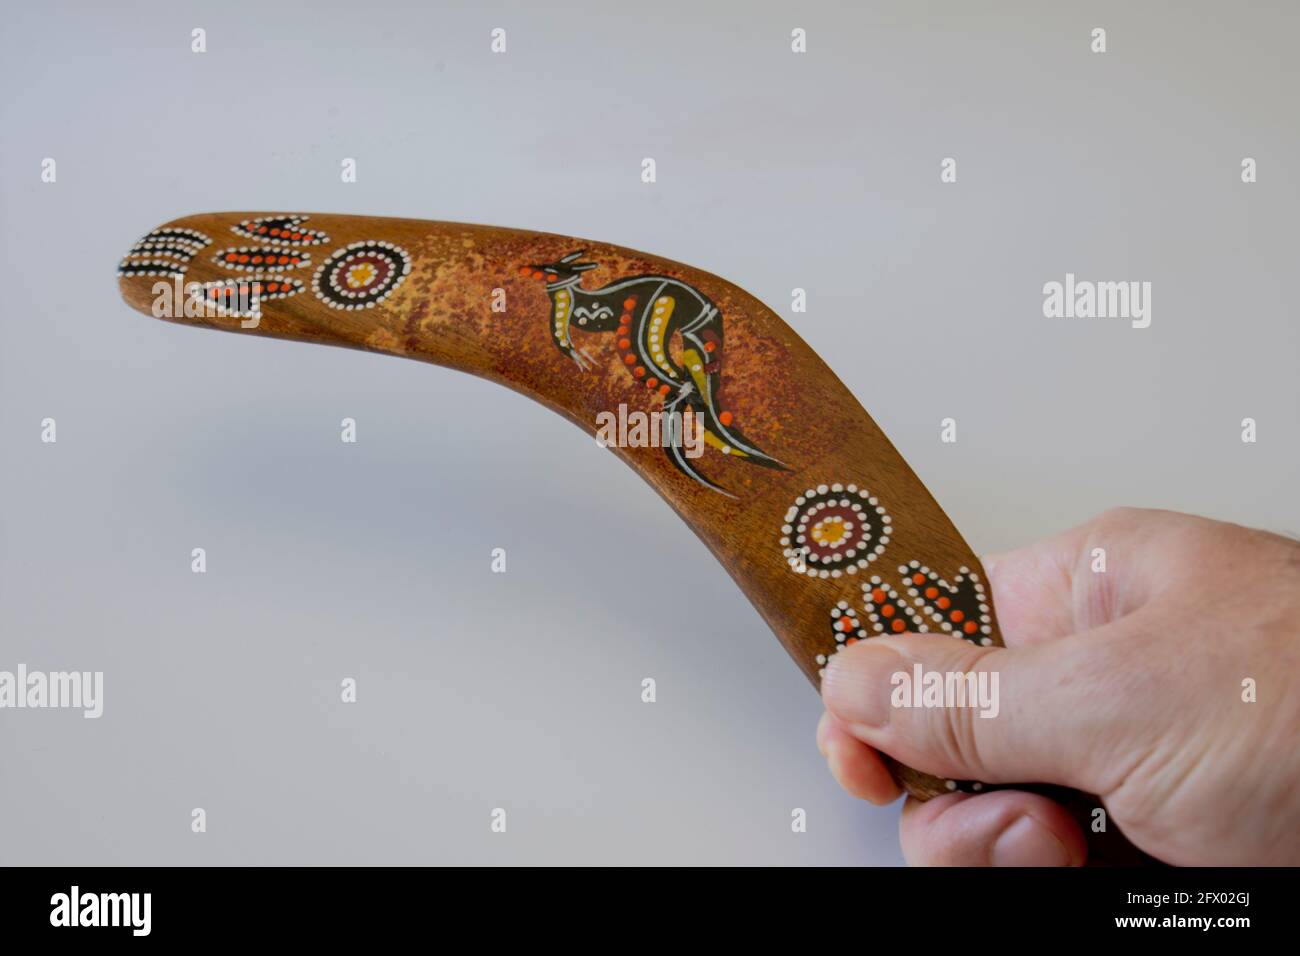 man holding colorful and ornate boomerang. australian souvenir, selective focus. isolated white Background. Stock Photo